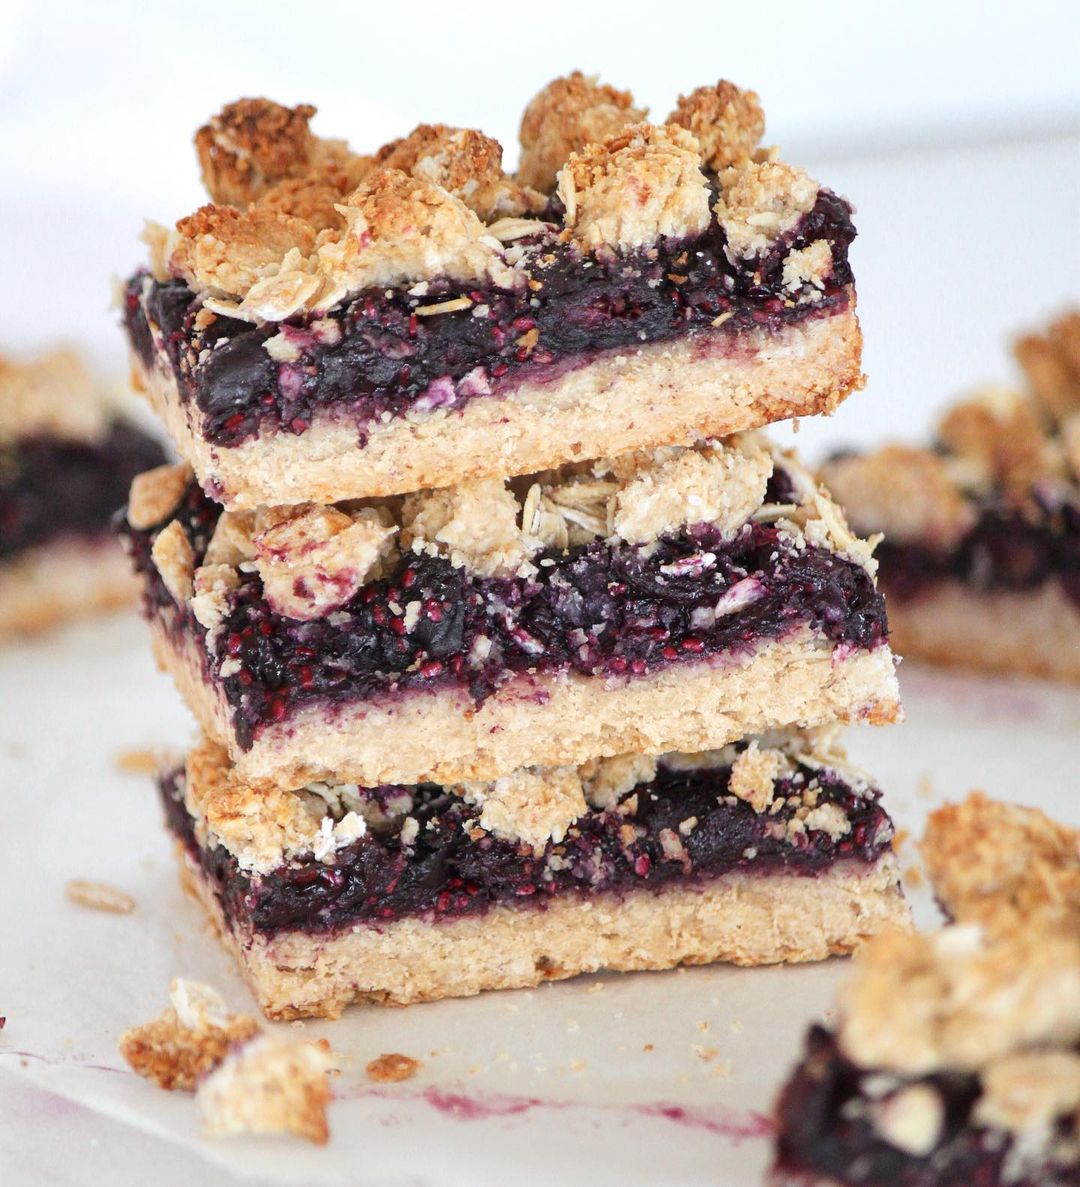 Blueberry Crumble Bars